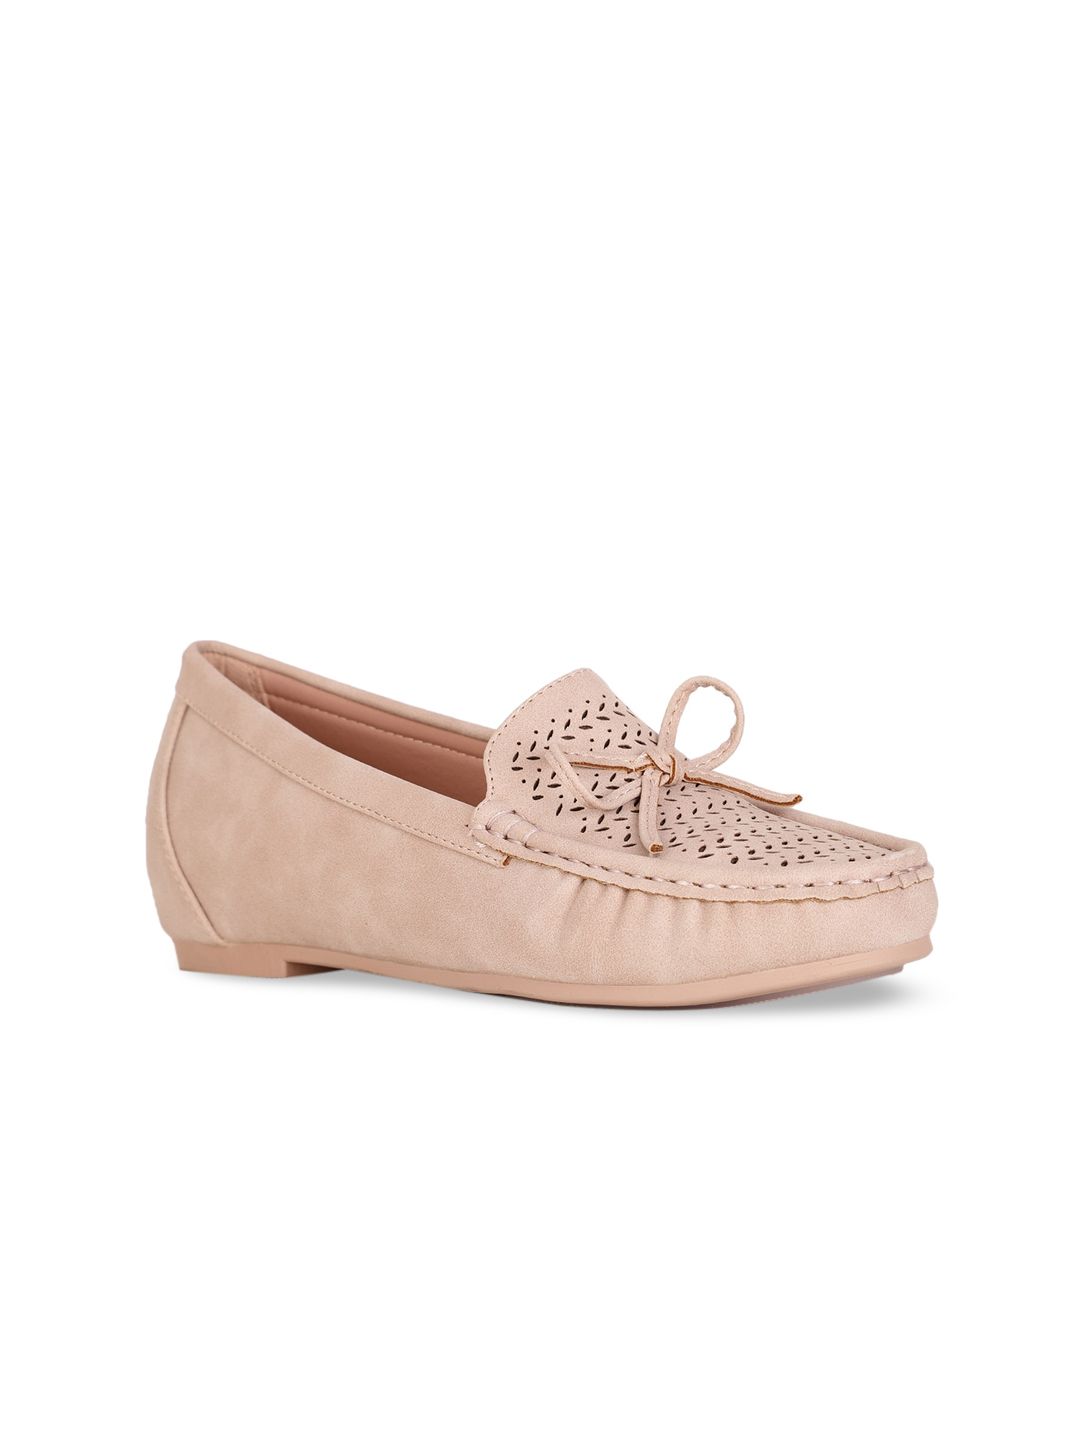 Bata Women Pink Loafers Price in India